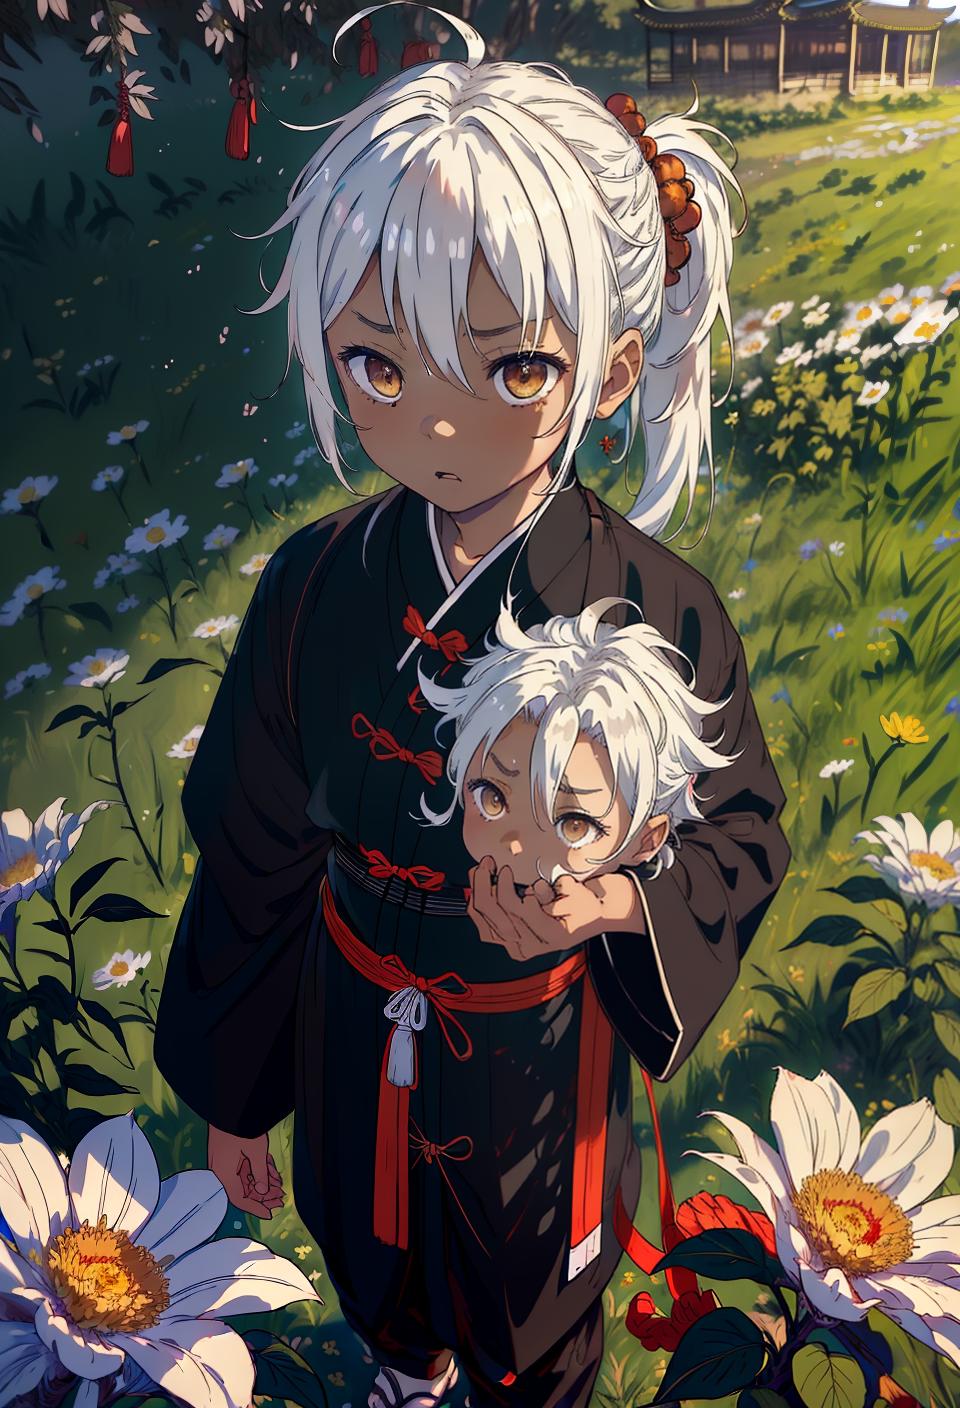  ((trending, highres, masterpiece, cinematic shot)), 1boy, chibi, male chinese outfit, flower field scene, medium-length messy white hair, long ponytail, large amber eyes, antisocial, loner personality, surprised expression, very dark skin, epic, toned